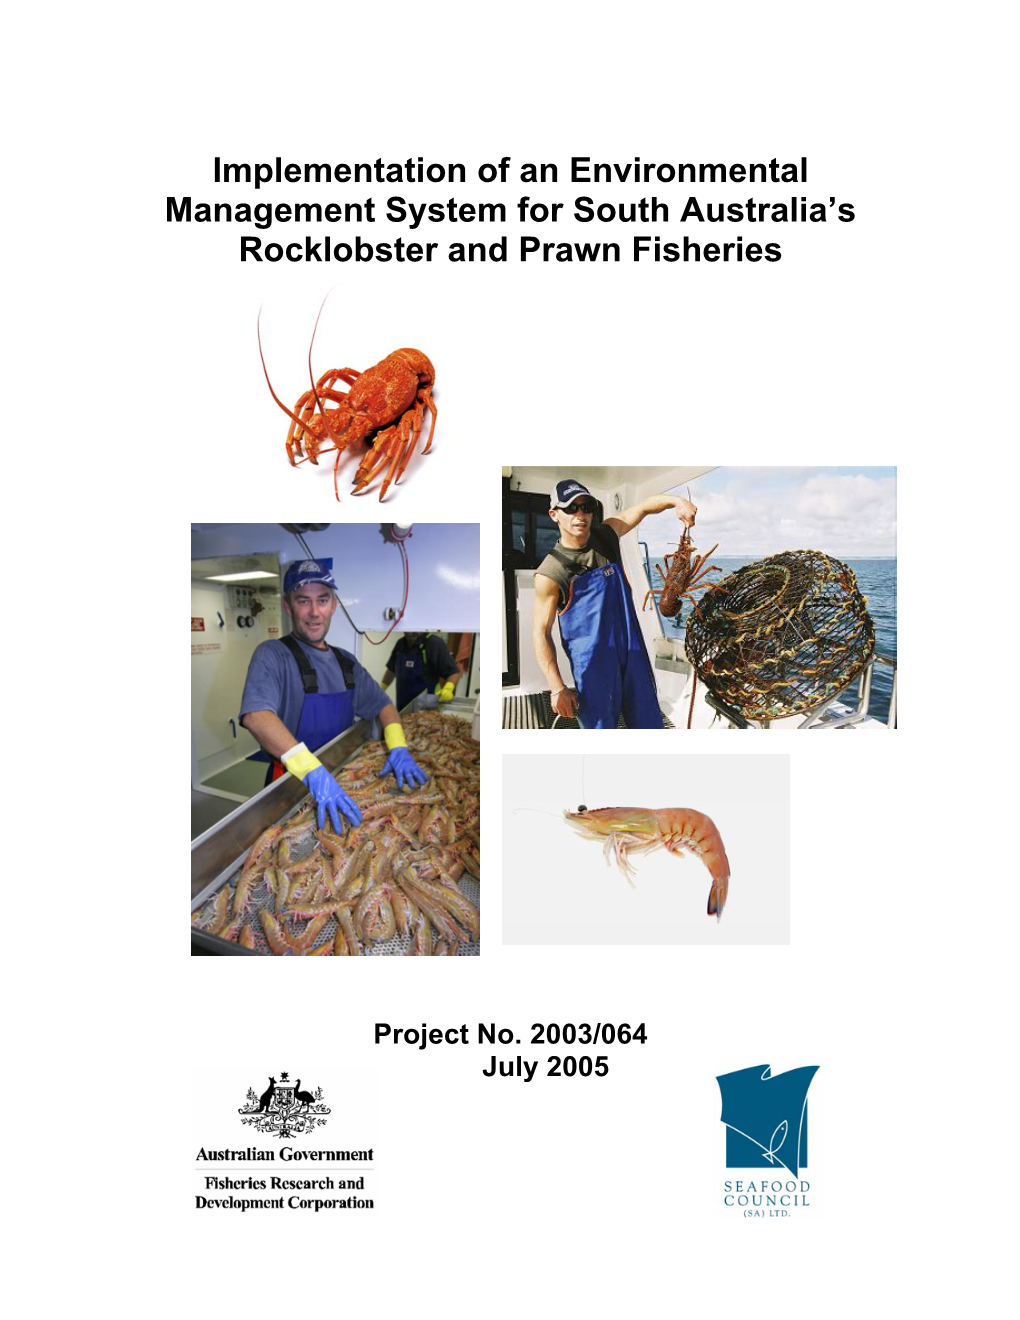 Implementation of an Environmental Management System for South Australia’S Rocklobster and Prawn Fisheries